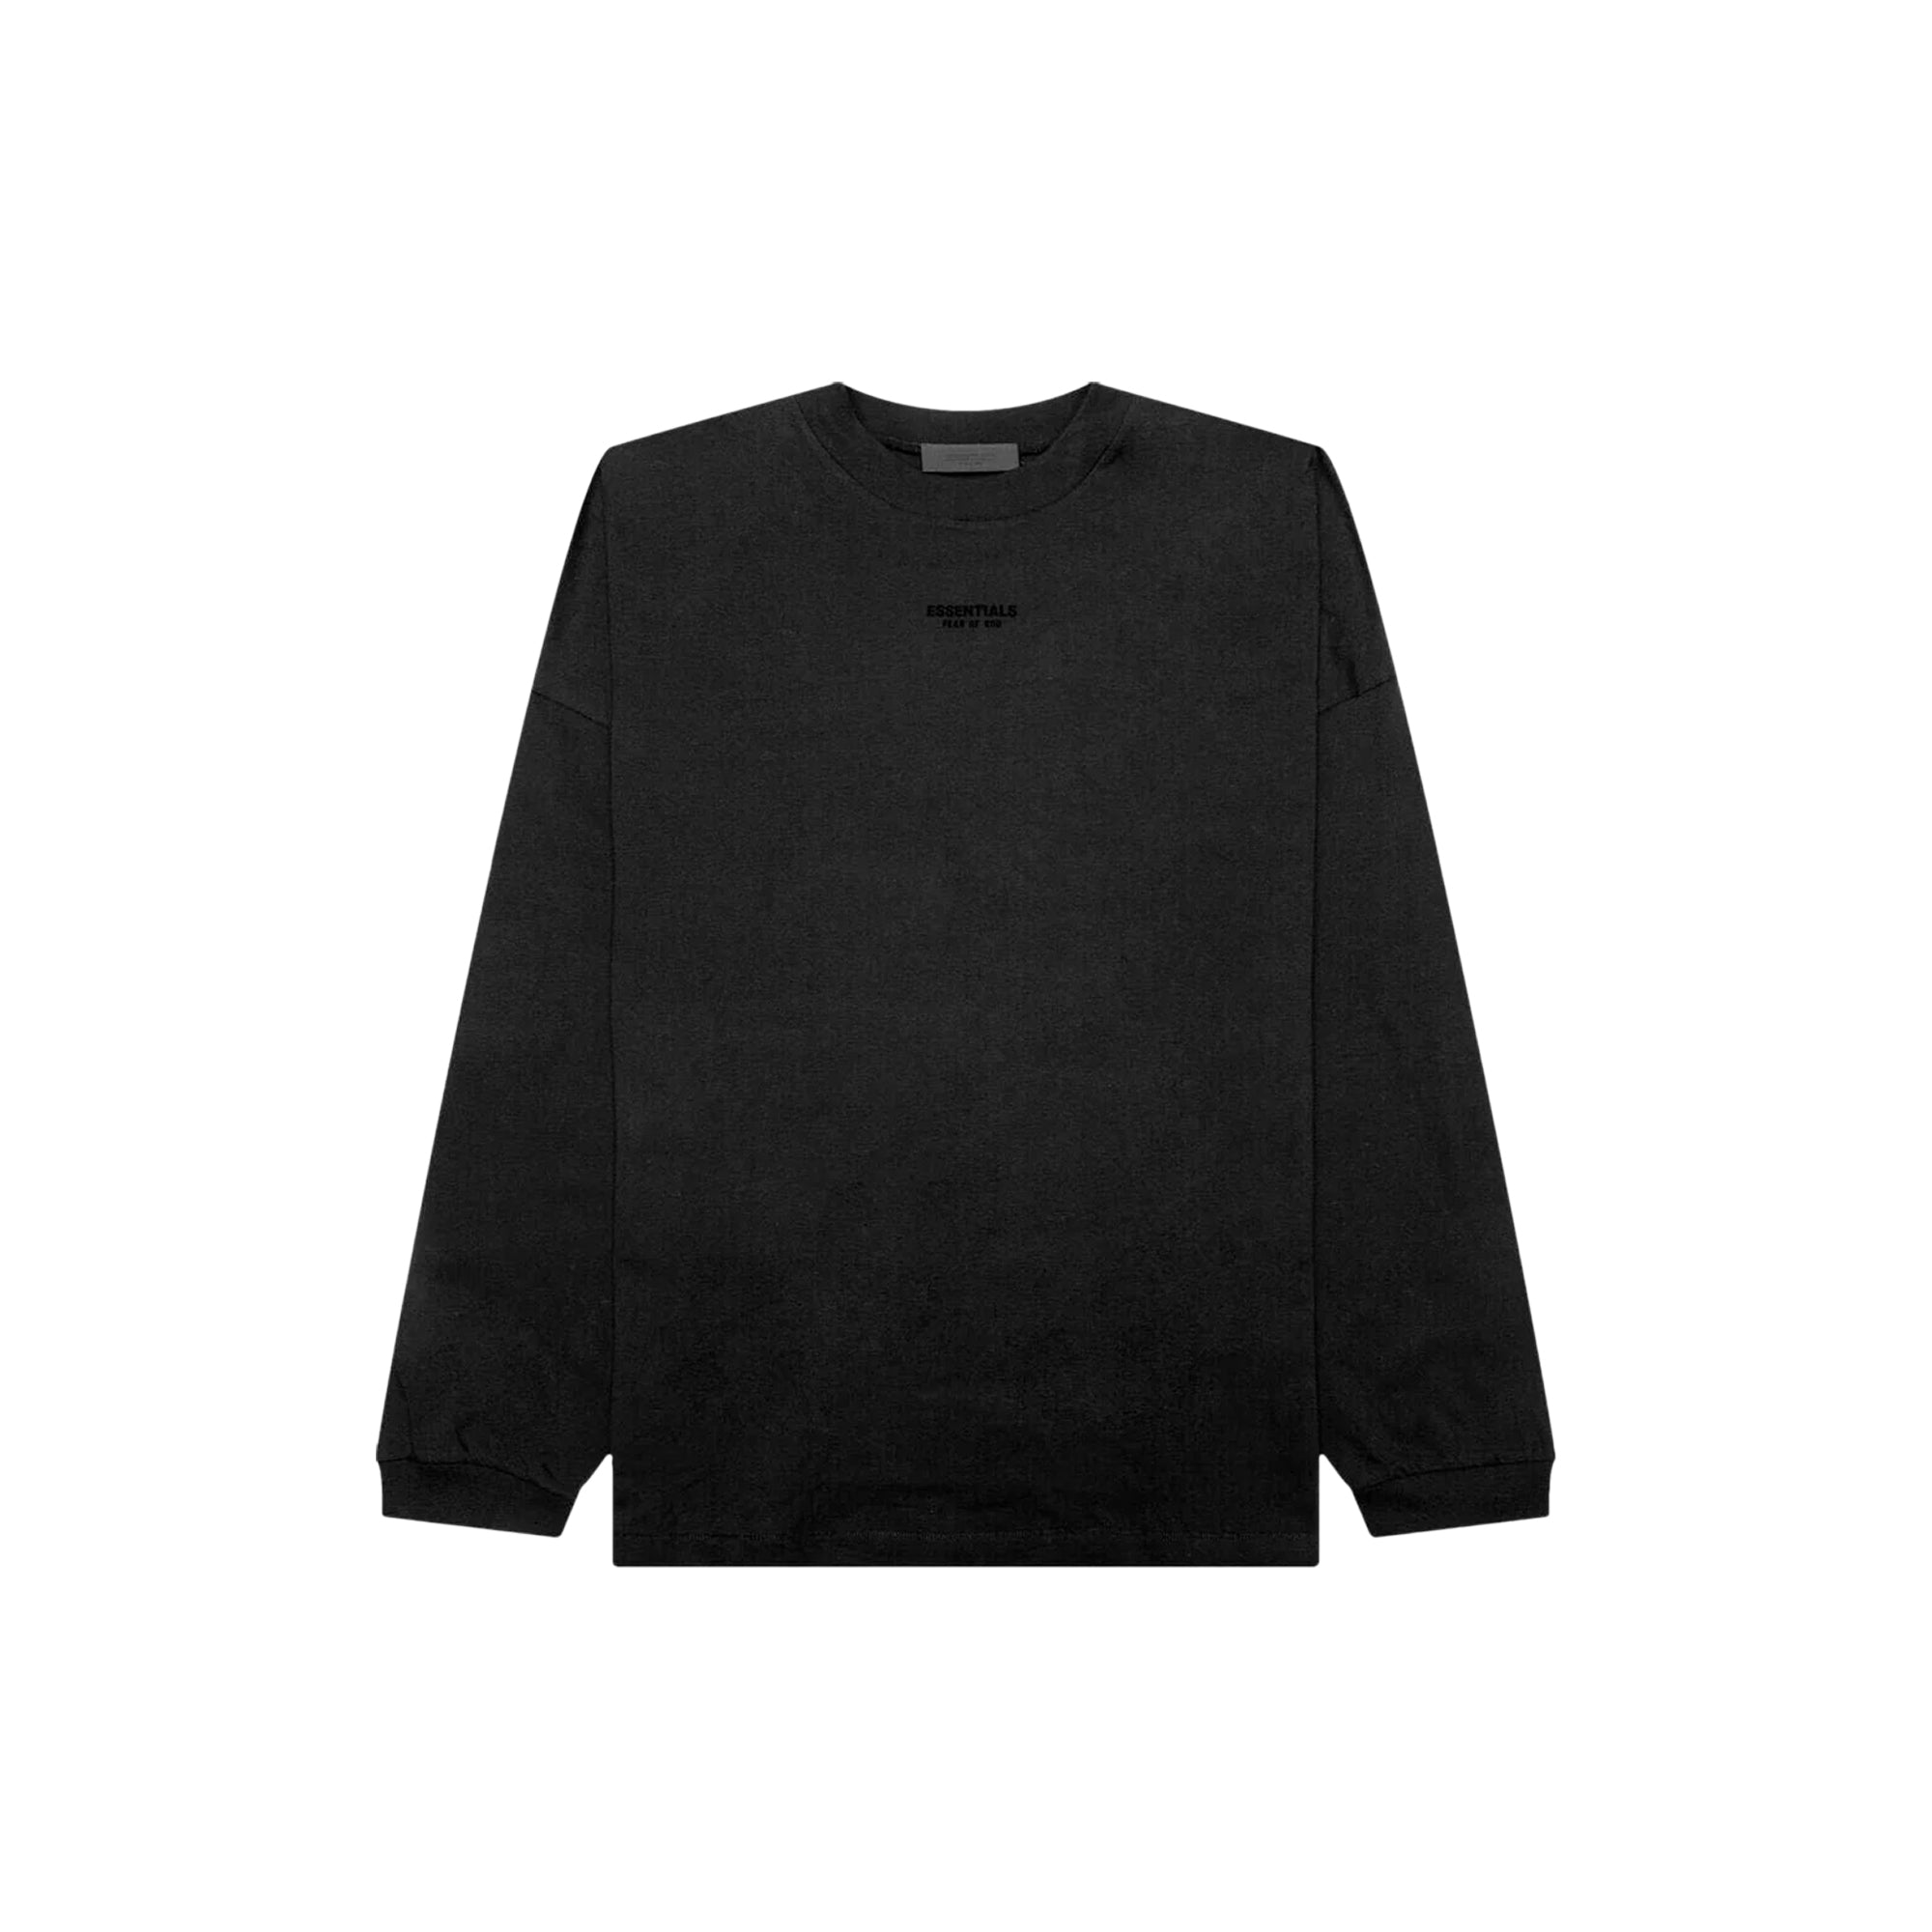 Fear of God Essentials LS Tee card image